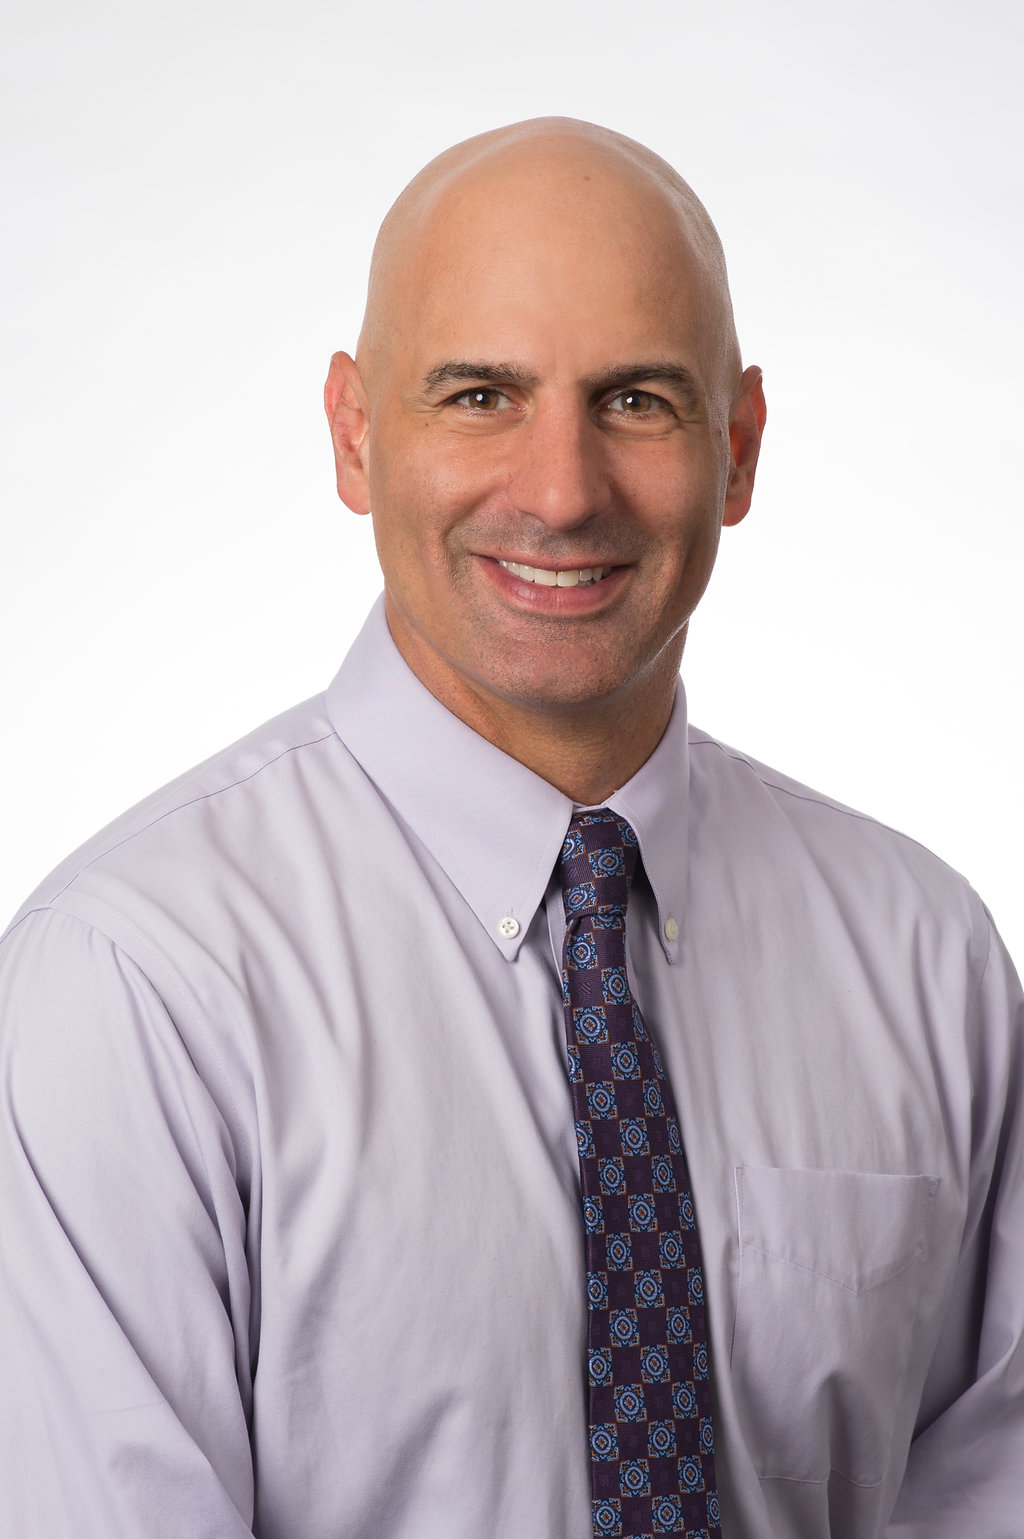 Todd M. Alessandri, Ph.D. joins Bryant University as new Dean of the College of Business